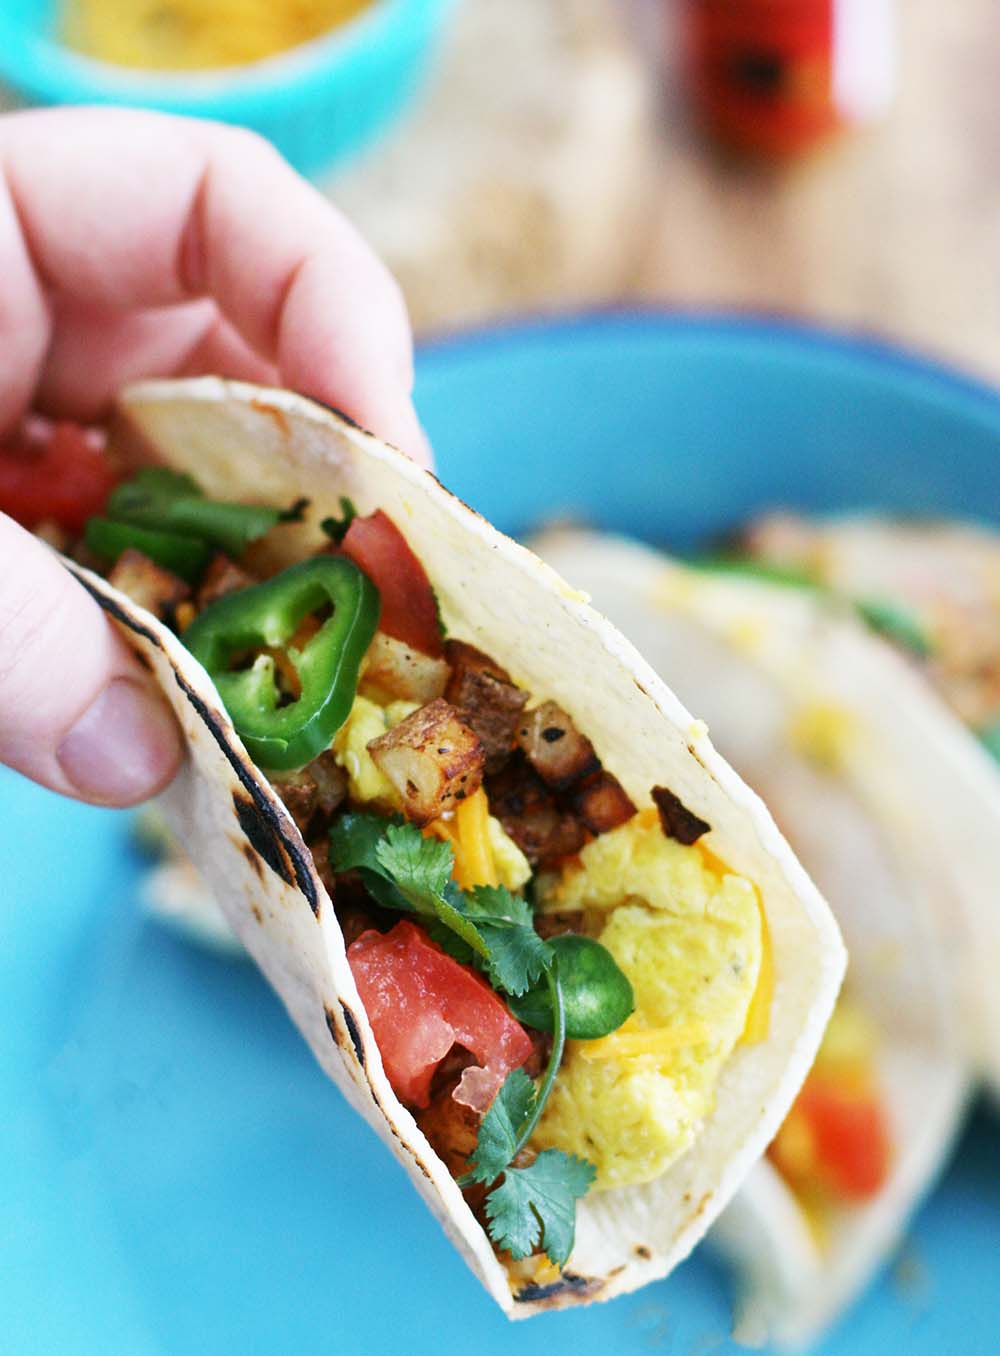 Egg & potato breakfast tacos: Simple ingredients make for a super cheap breakfast for under $5.